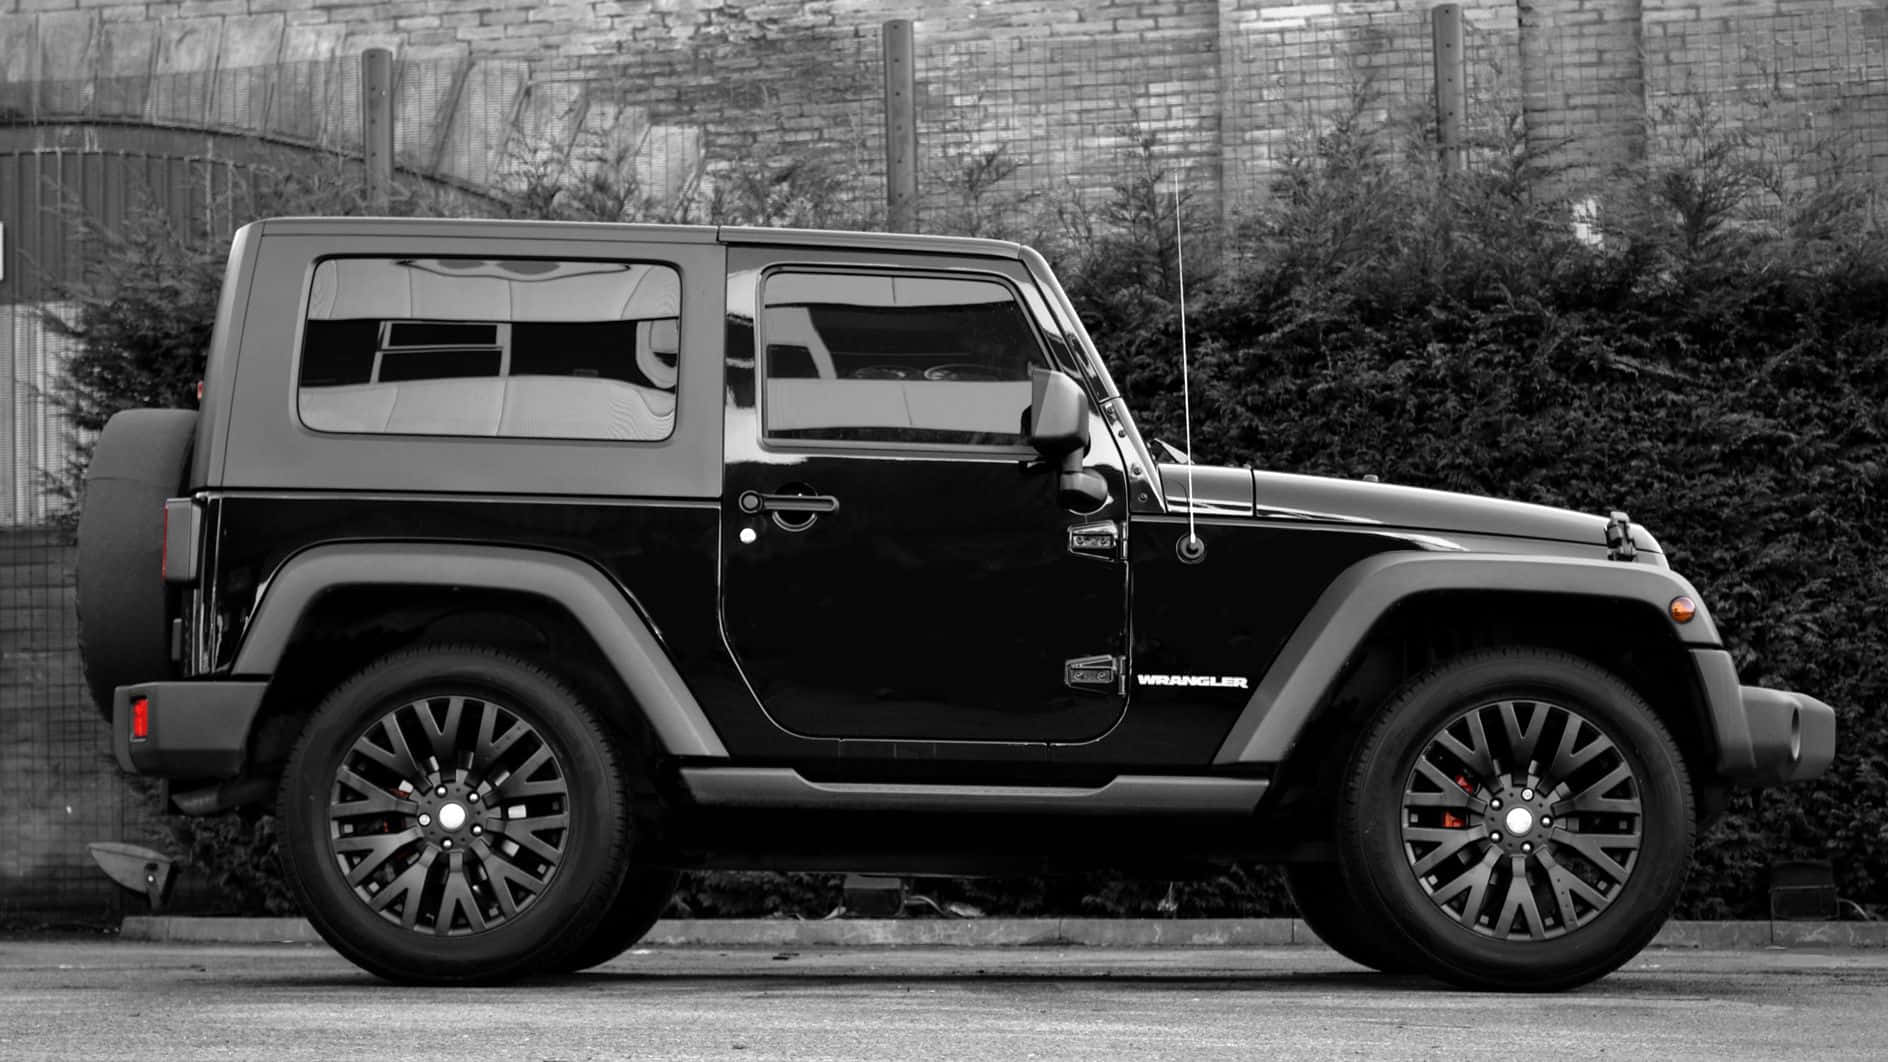 Turn heads with the stunning Black Jeep